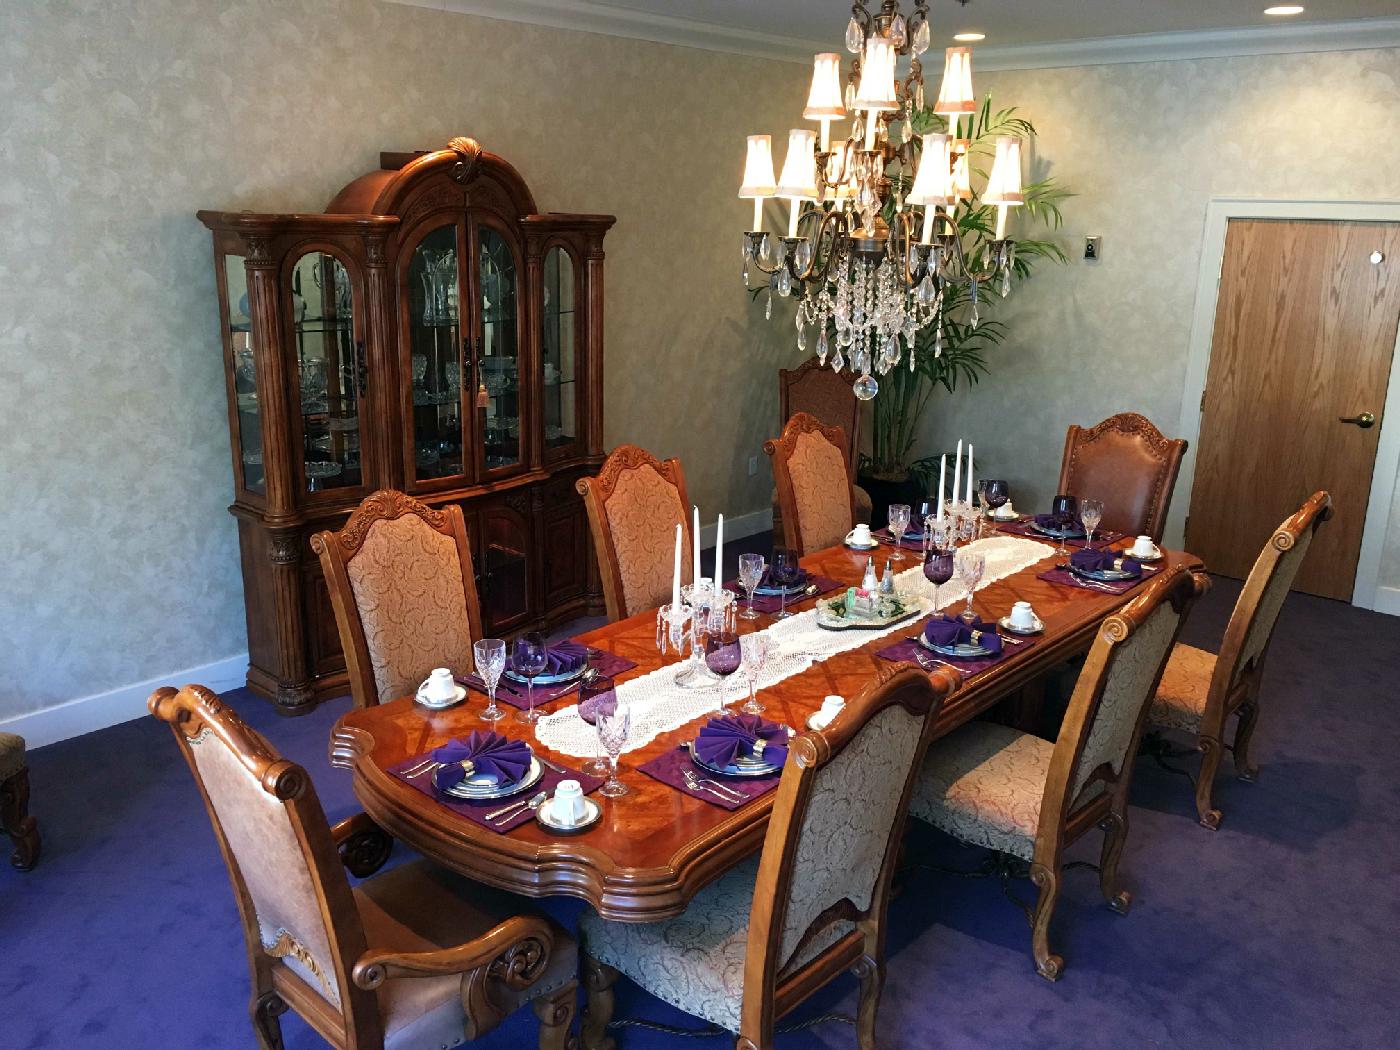 Private Dining Room at Whispering Winds